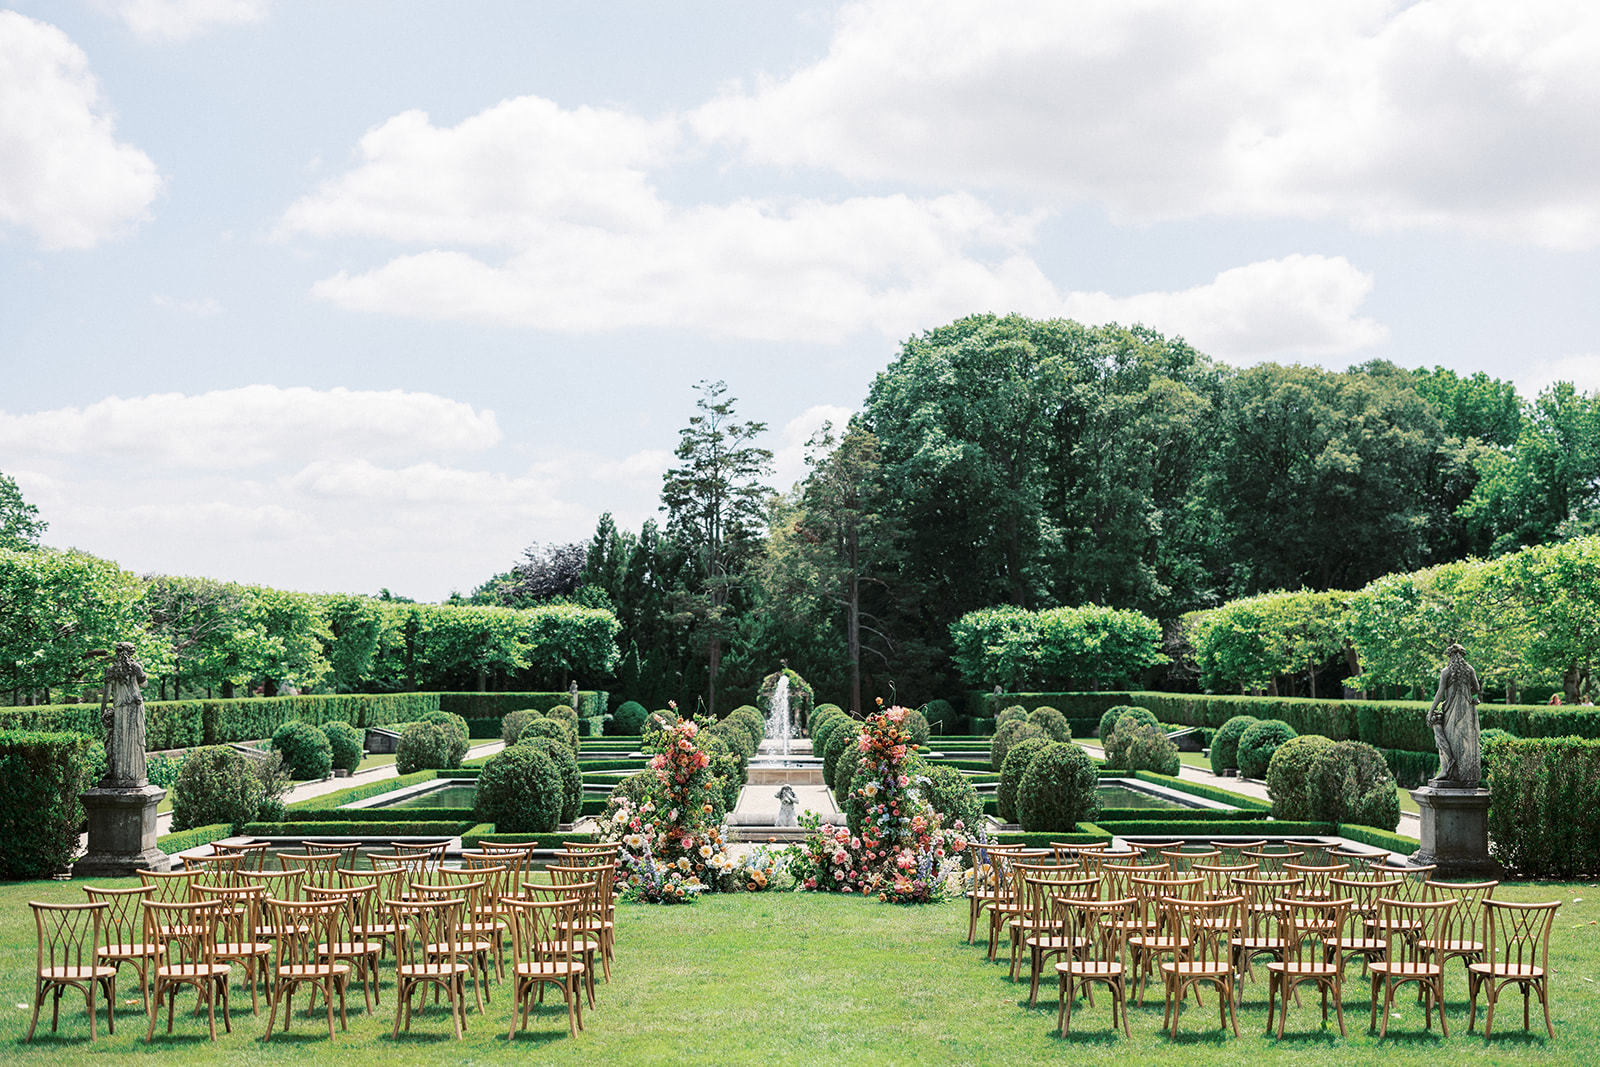 Details of a wedding ceremony set up in the Oheka Castle garden lawn